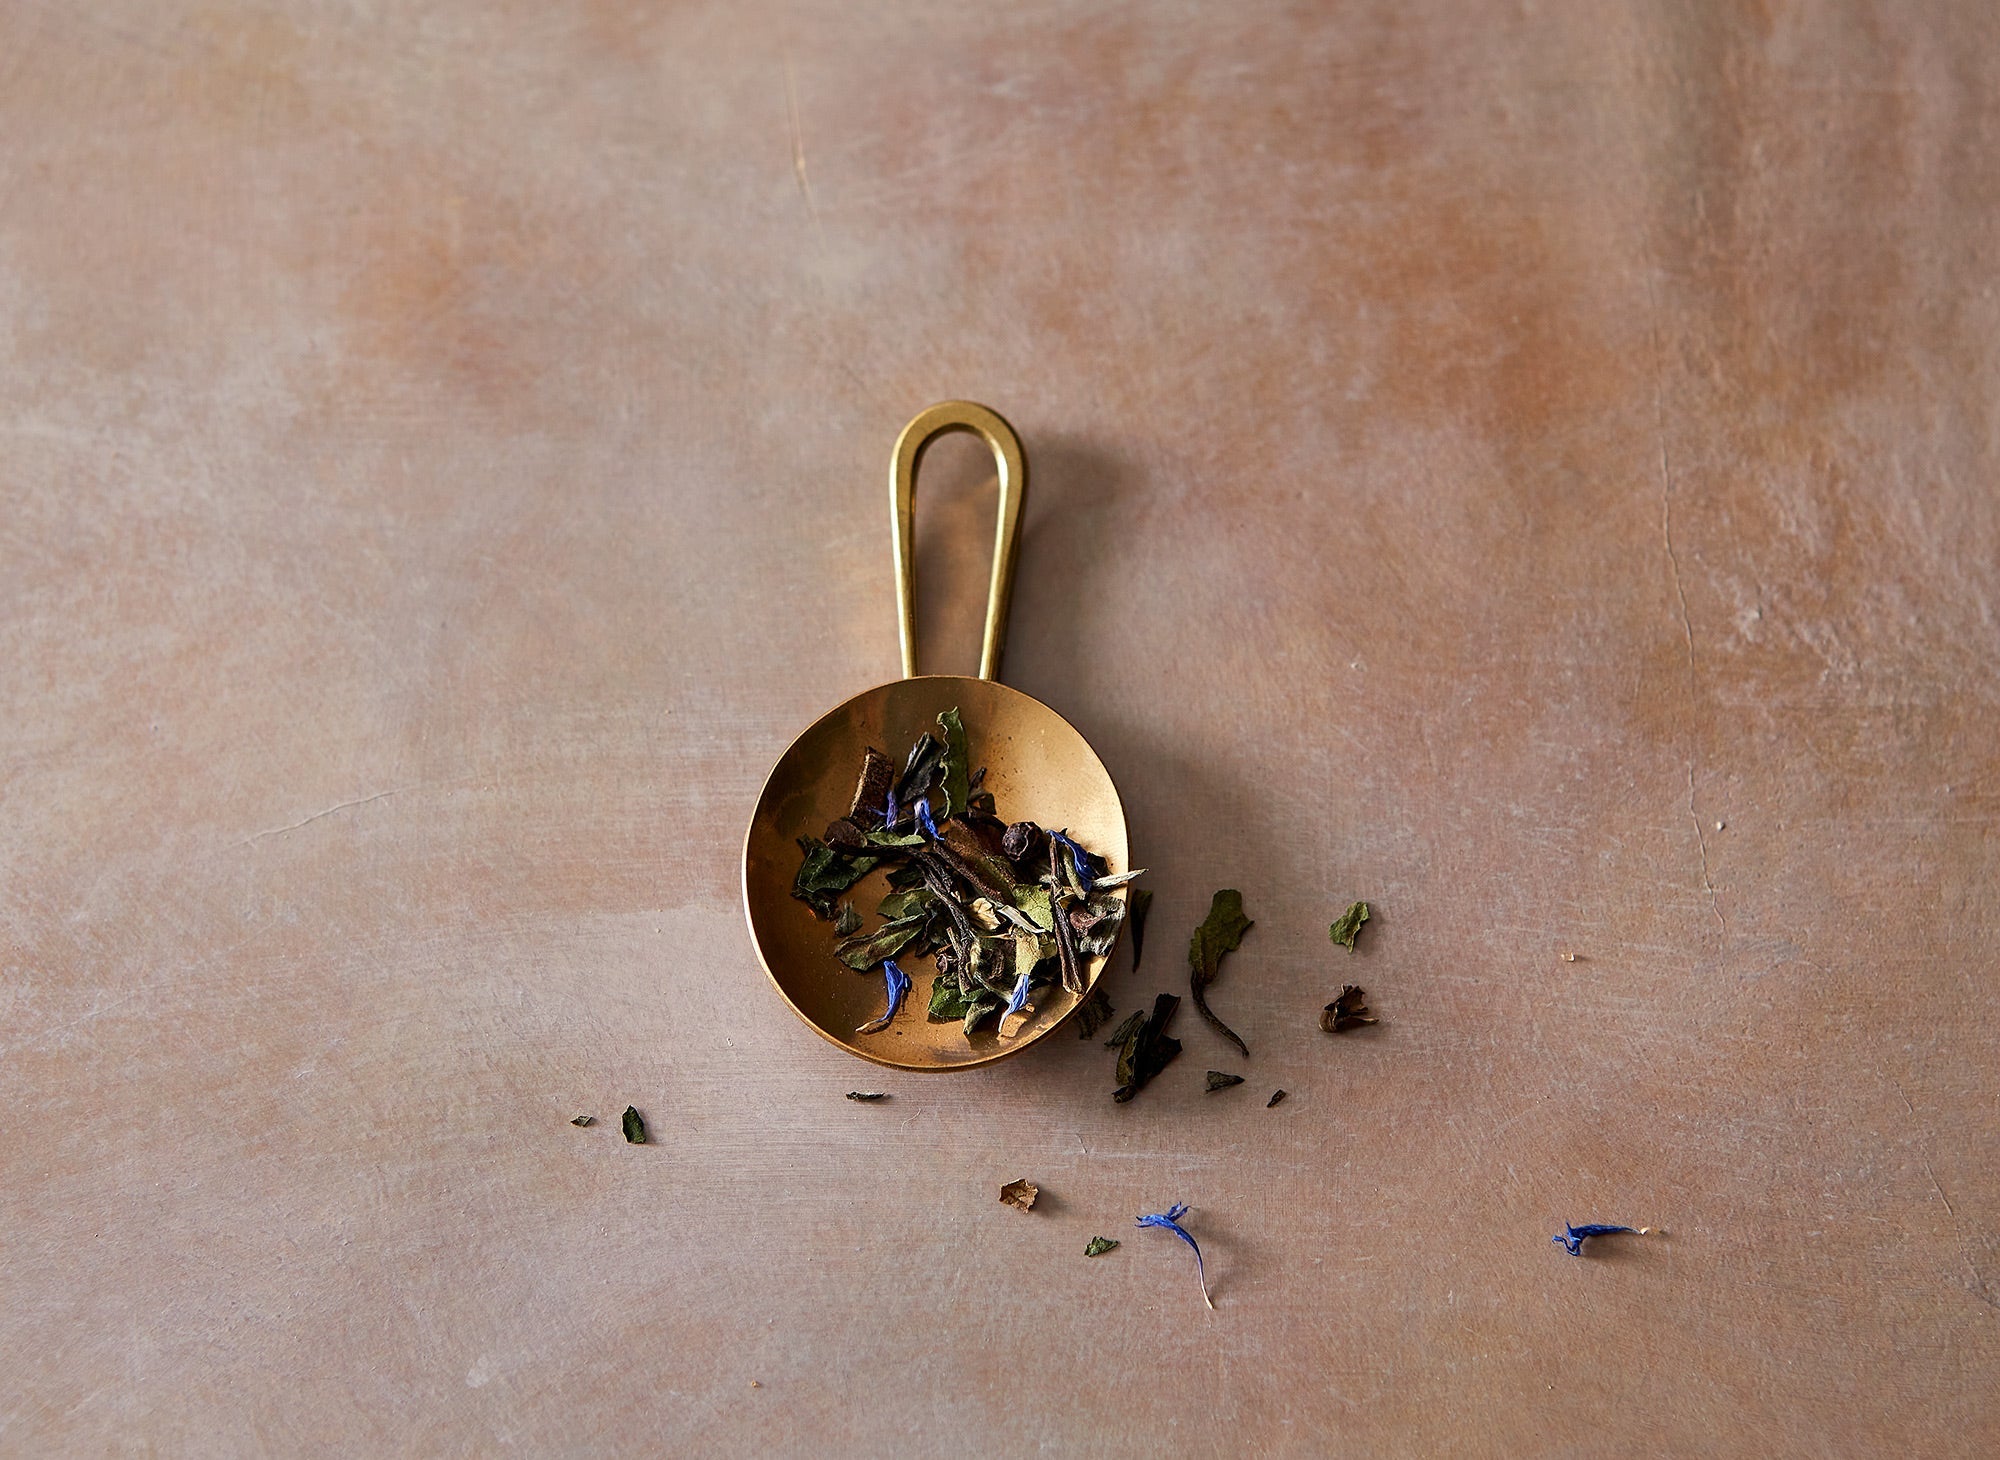 Shop fine tea accessories at BELLOCQ Tea Atelier. Sourced from around the world, our tea accessories are the perfect complement to every cup.